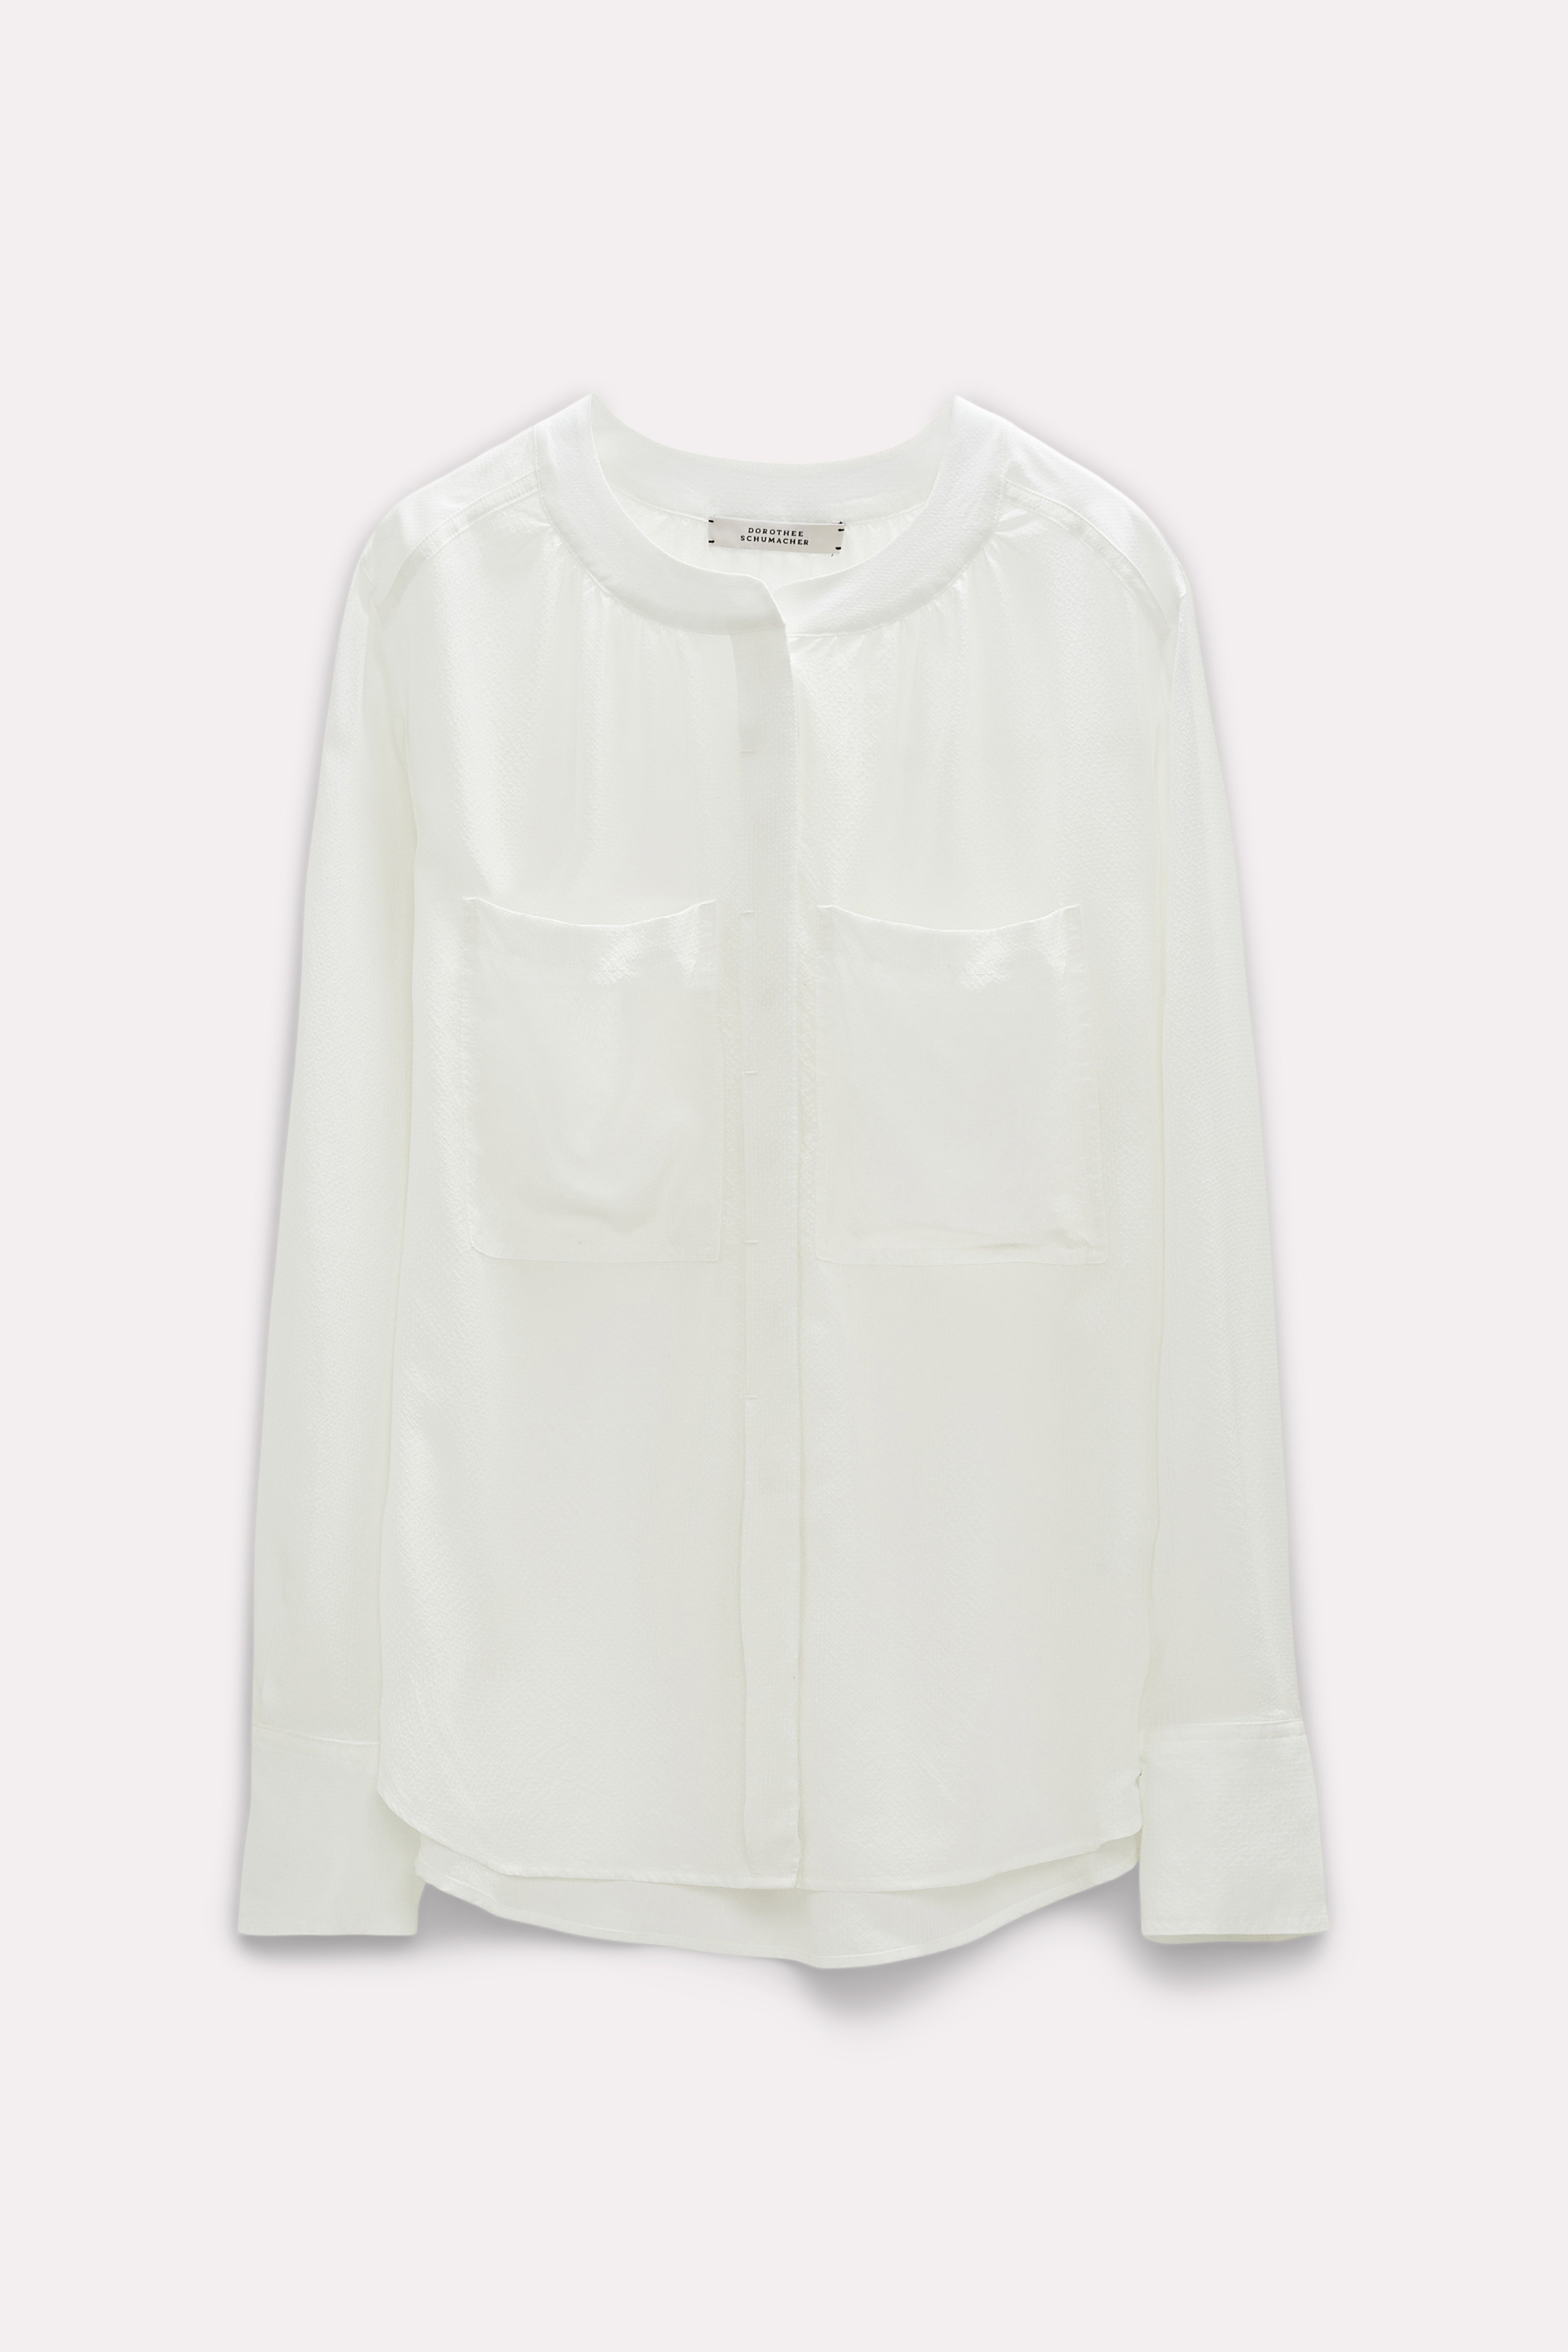 Dorothee-Schumacher-OUTLET-SALE-SILKY-EASE-blouse-Blusen-ARCHIVE-COLLECTION.jpg